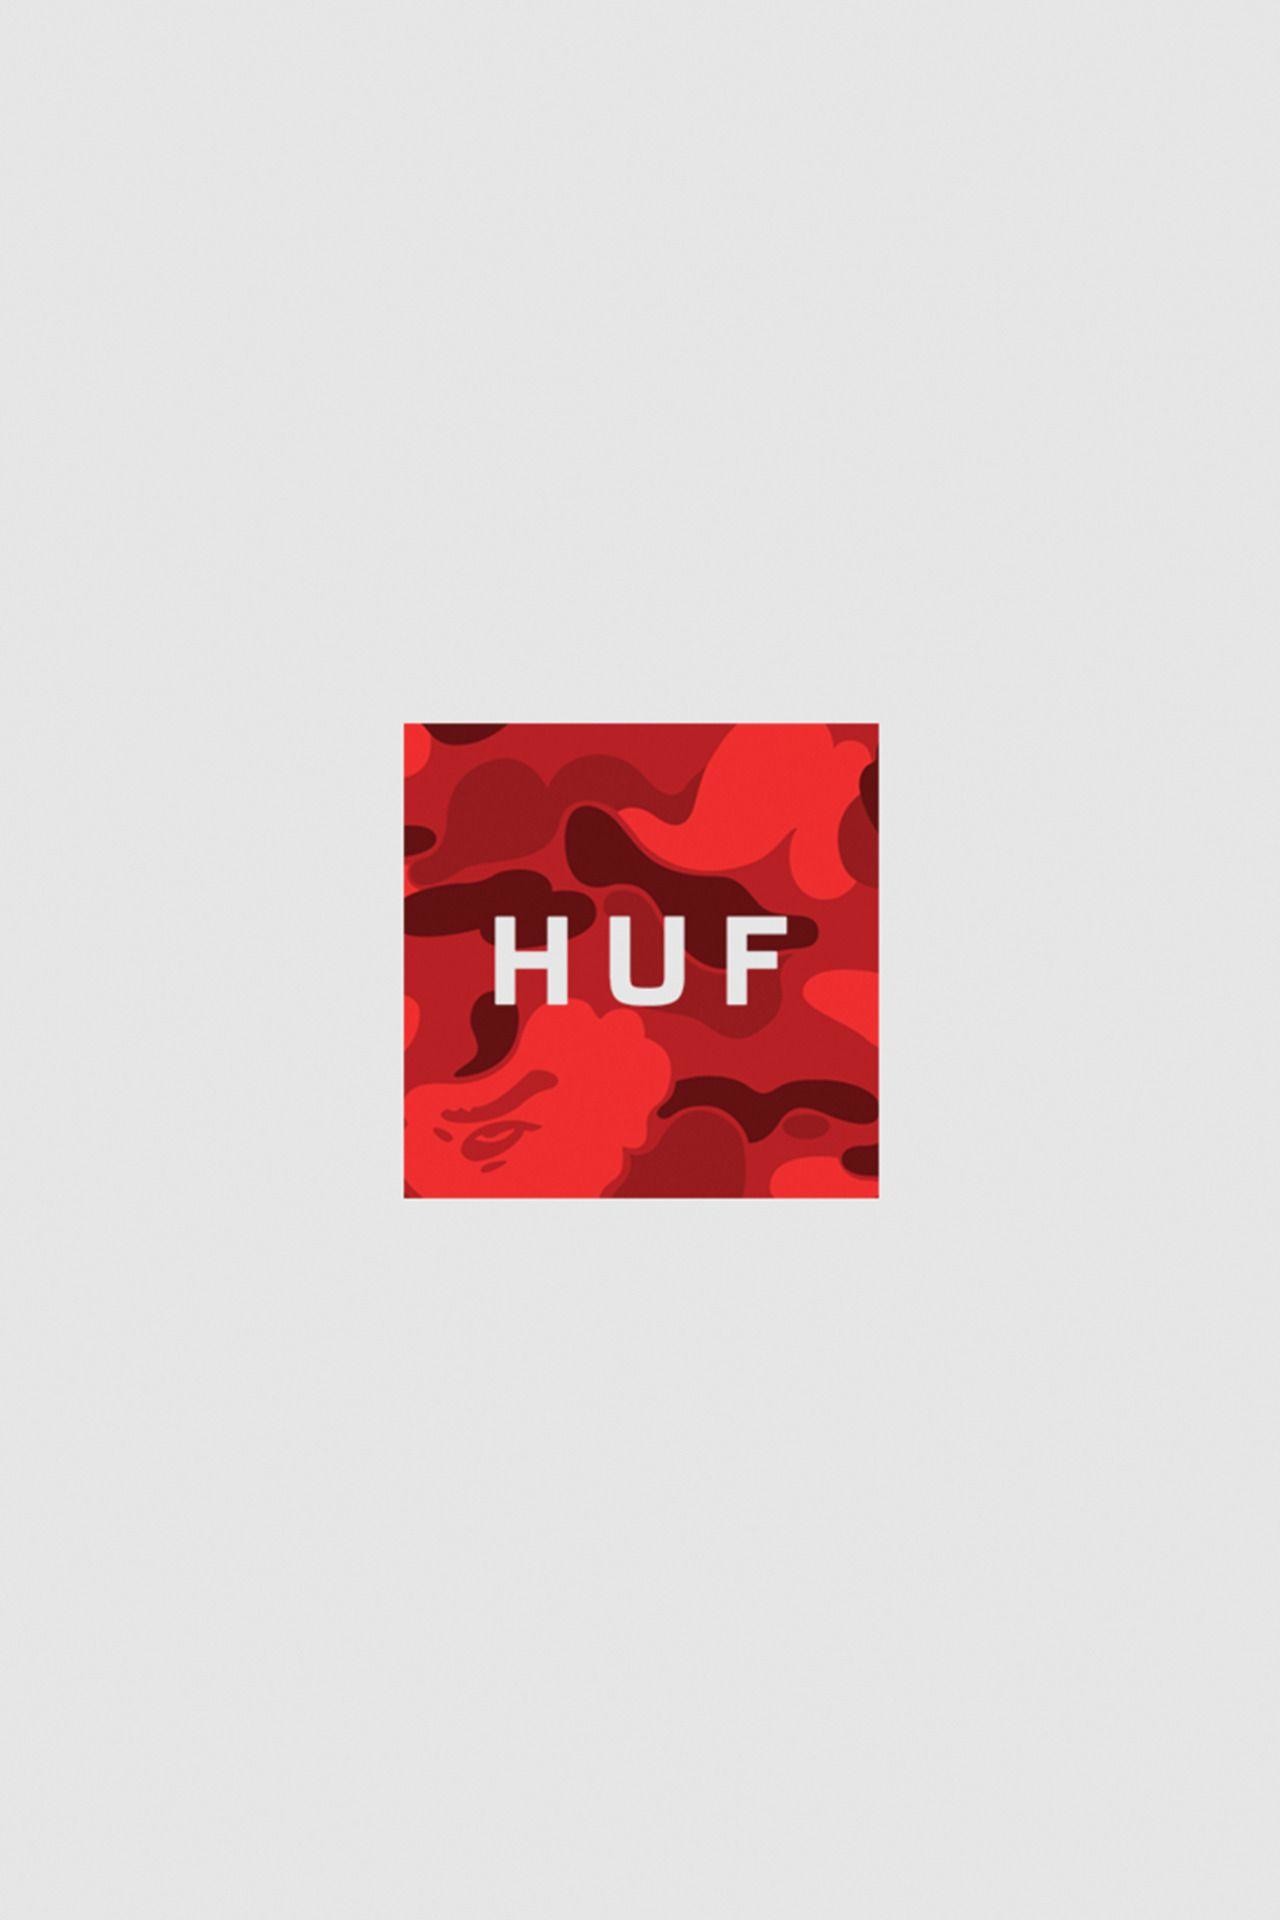 Huf Wallpaper - Huf Wallpaper Iphone 5 , HD Wallpaper & Backgrounds